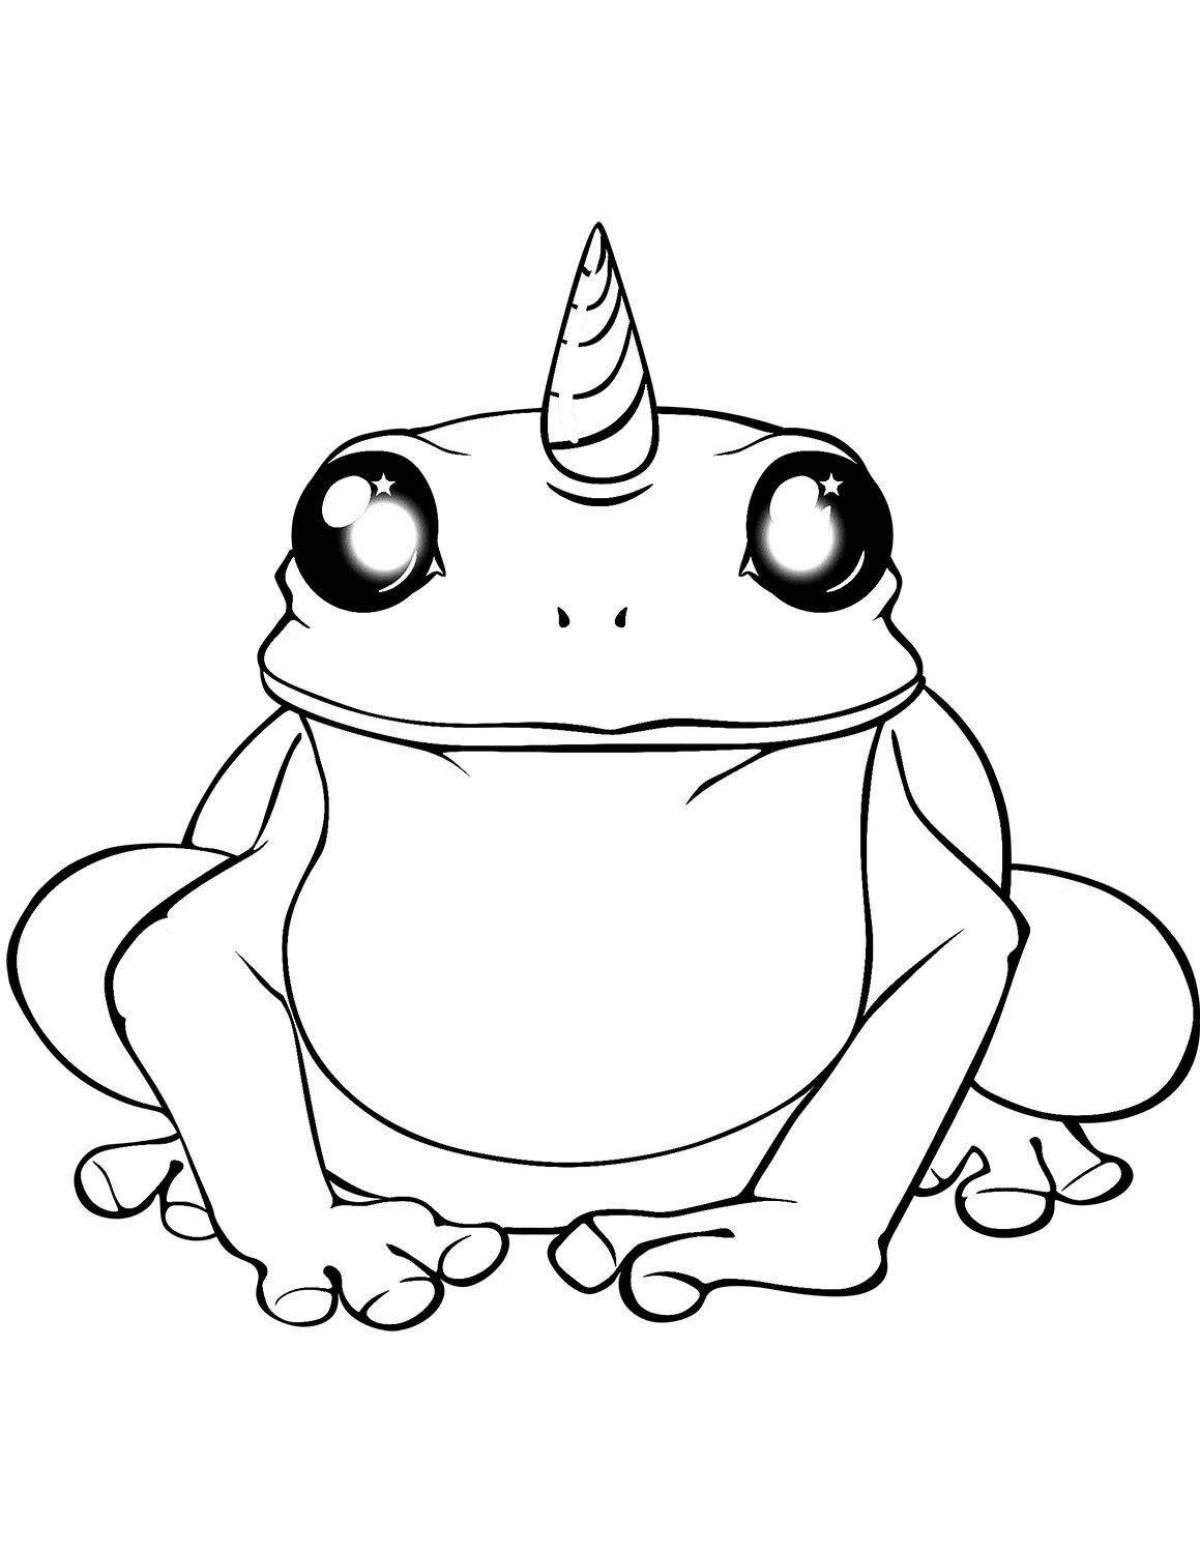 Great frog coloring book